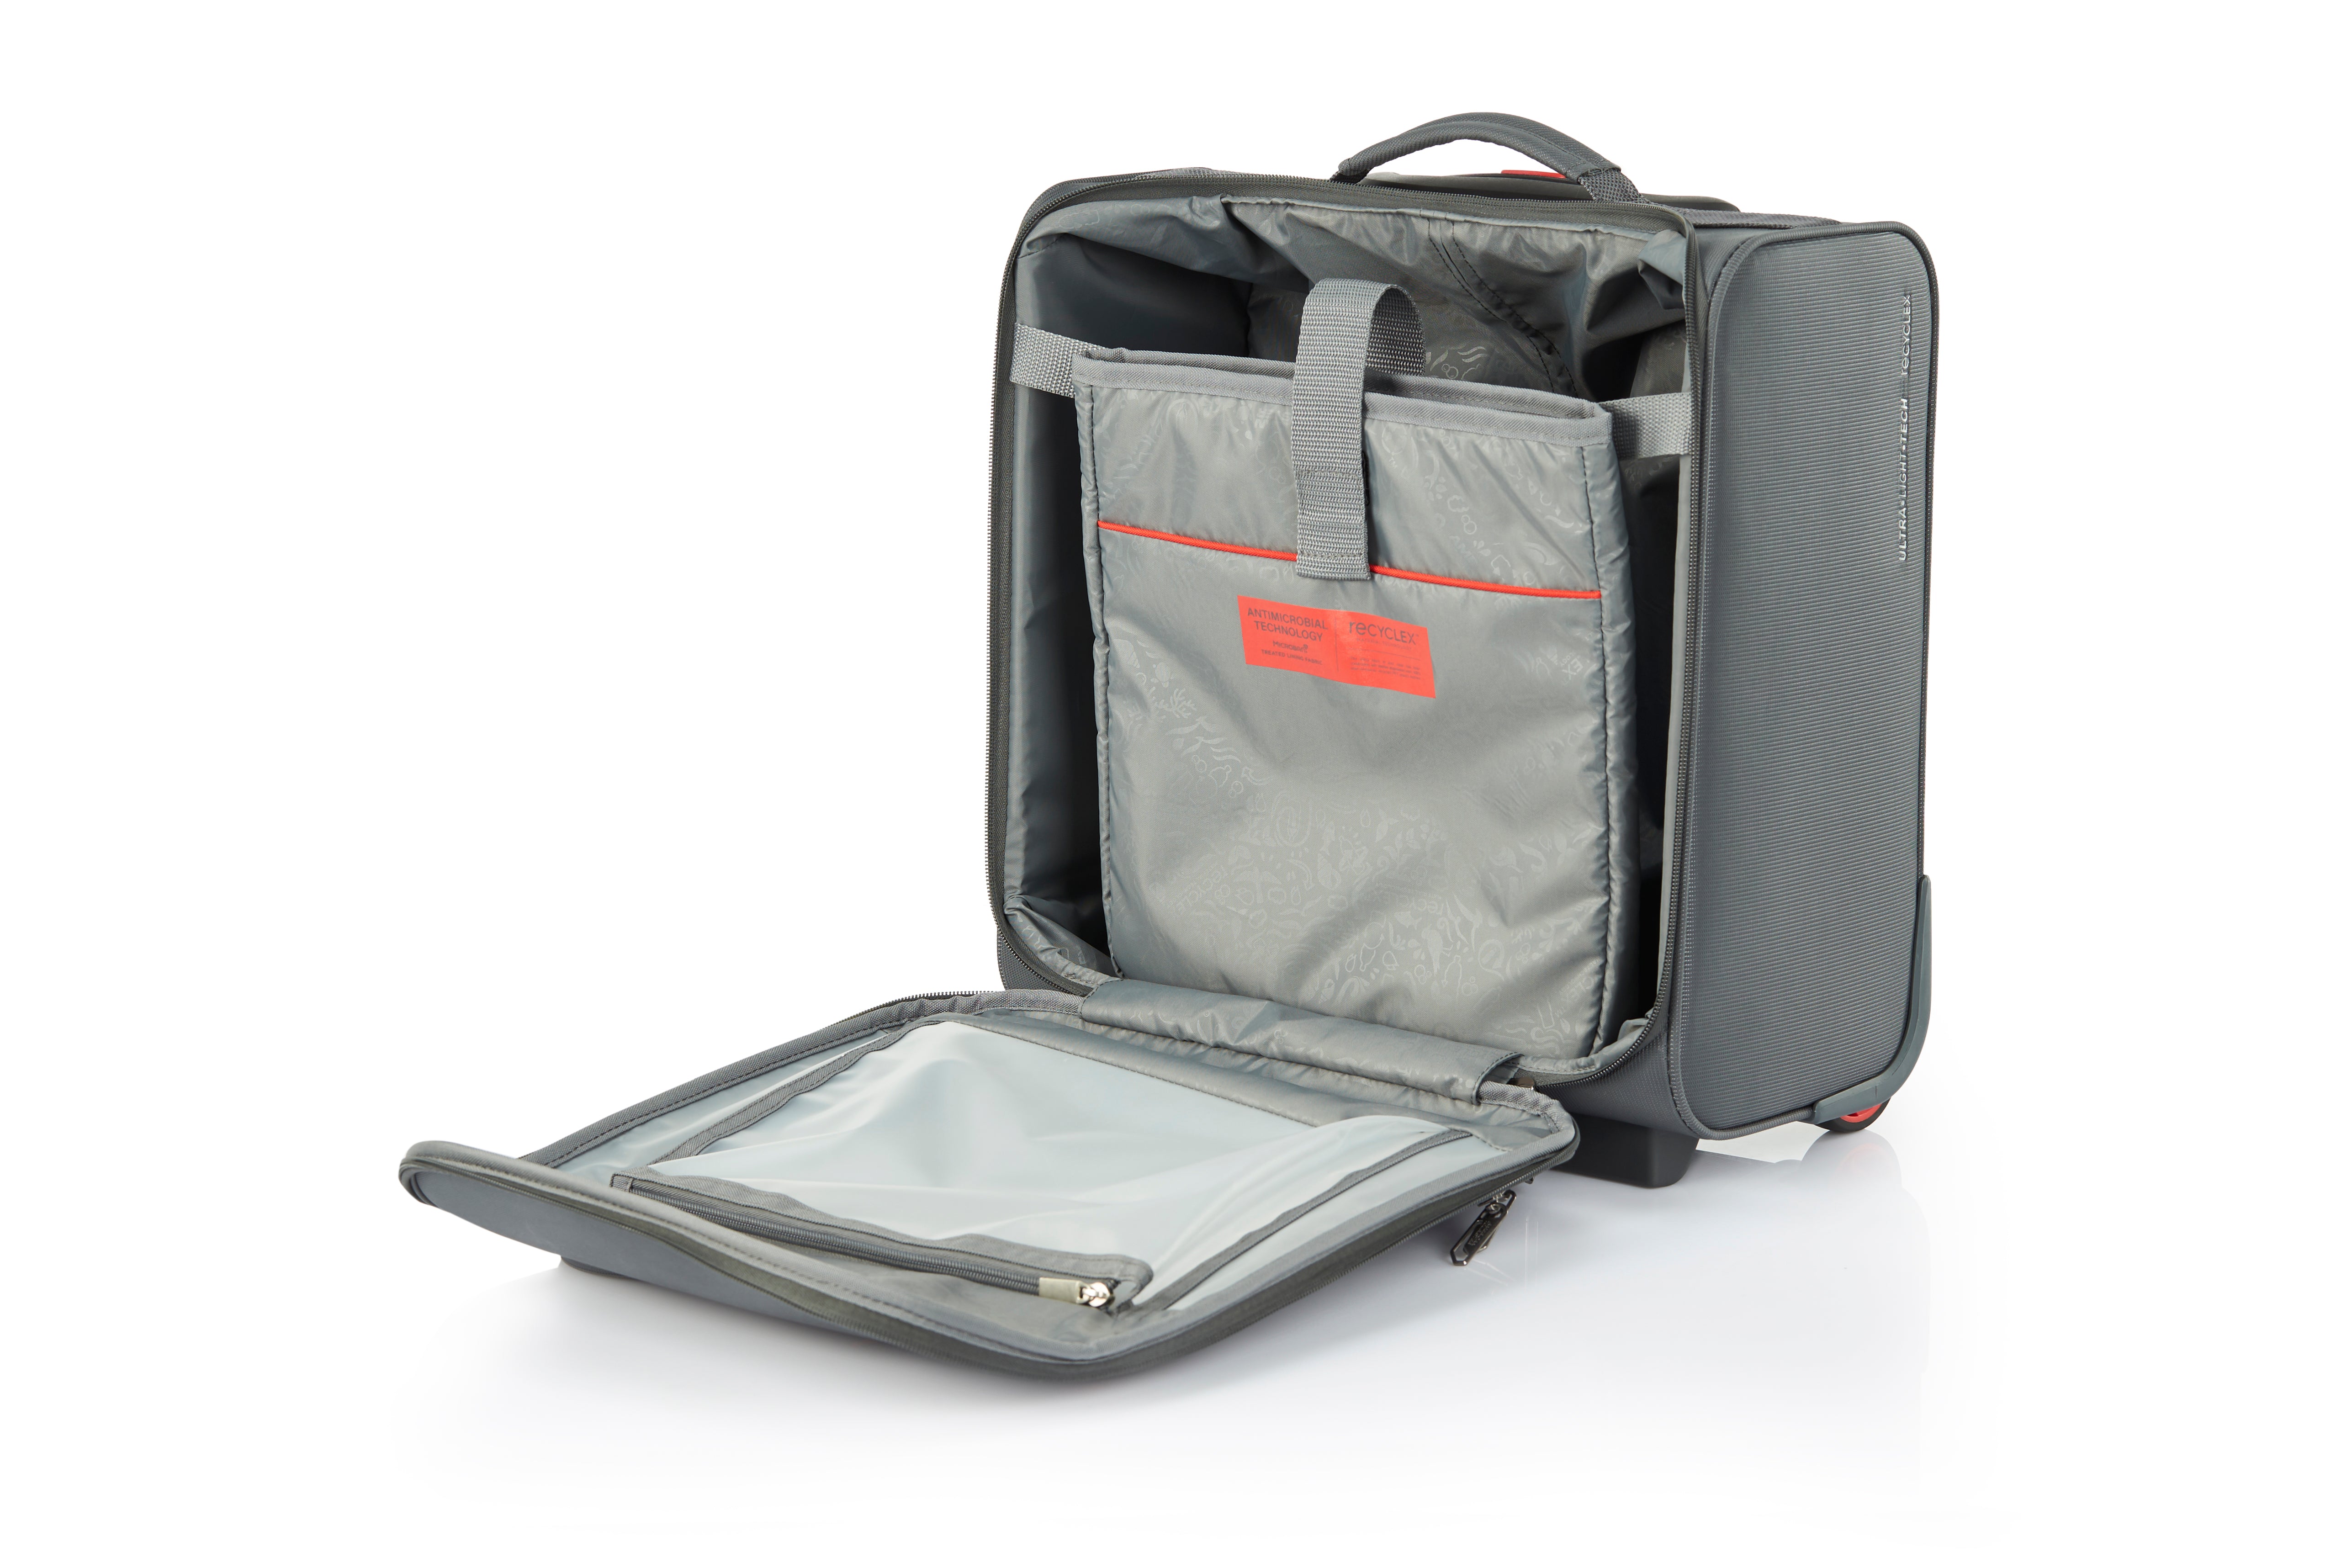 American Tourister - Applite ECO Underseater Suitcase - Grey/Red-6